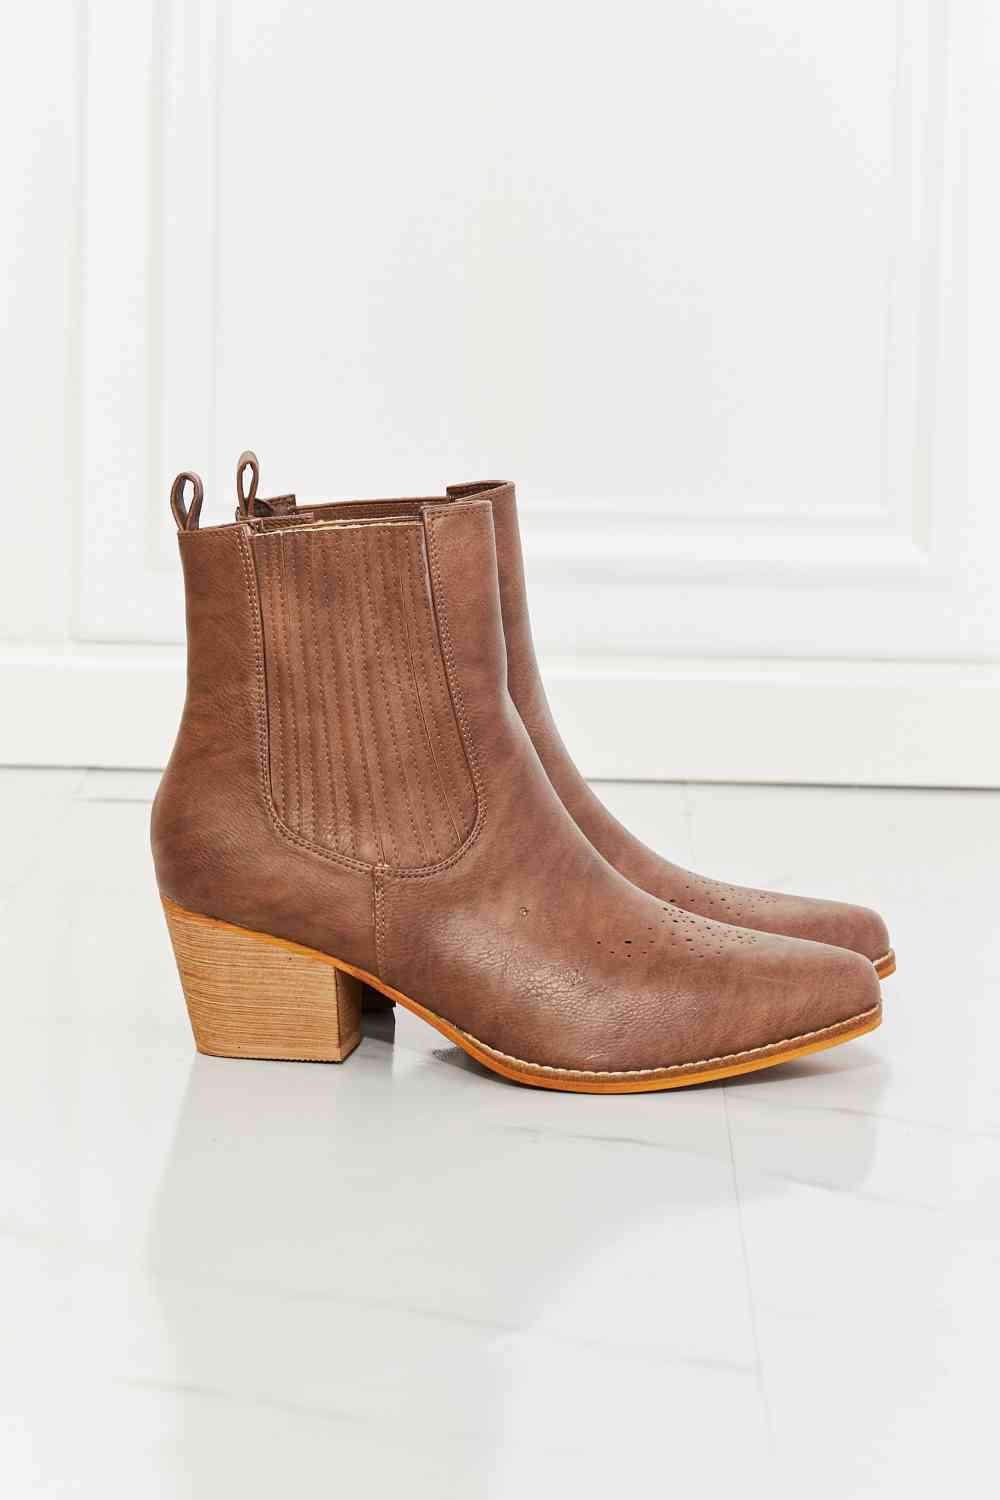 Love the Journey Stacked Heel Chelsea Boot in Chestnut - Accessories - Shoes - 6 - 2024